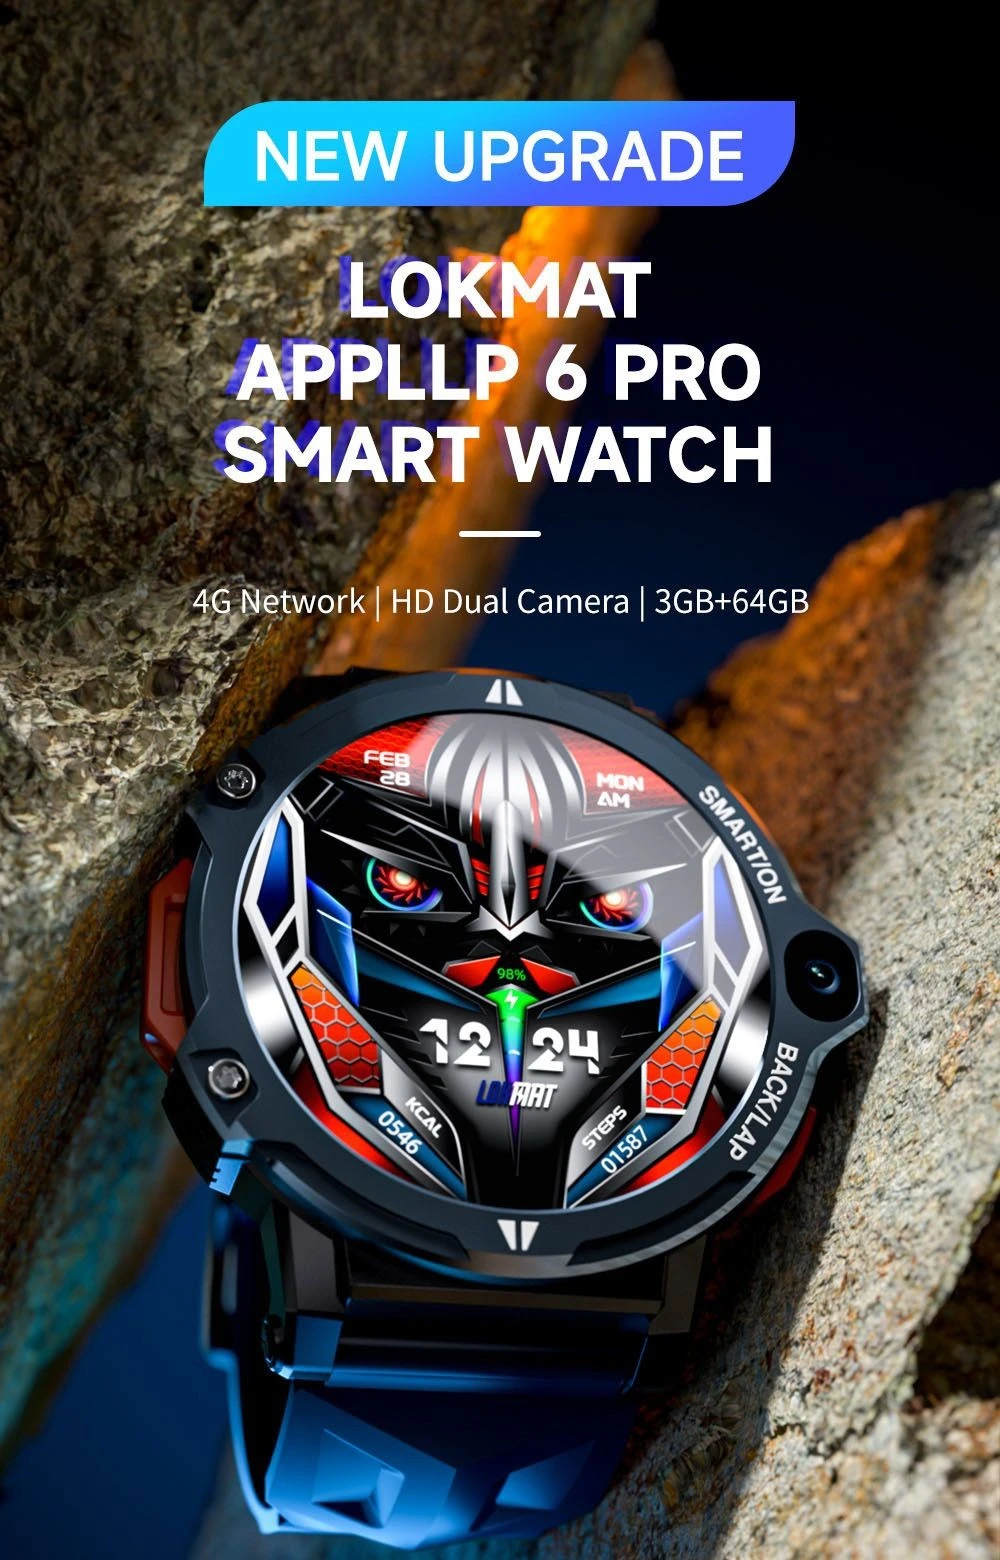 LOKMAT APPLLP 6 Pro 4G LTE Phone Watch, 3GB RAM 64GB ROM, Heart Rate Monitor, Support 2.4G WiFi, Beidou, GPS - Silver